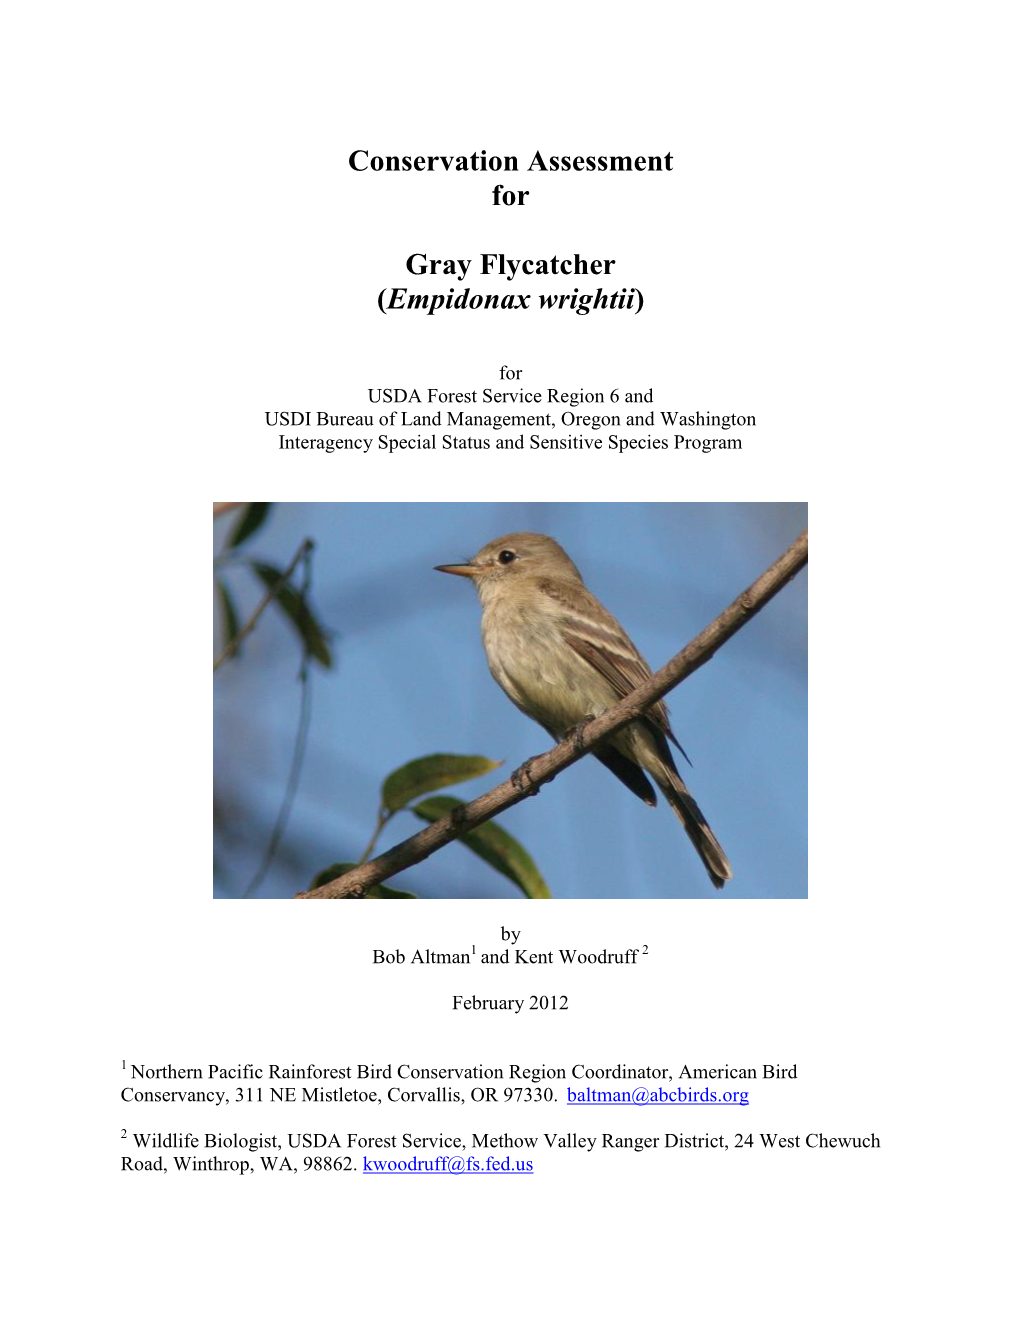 Conservation Assessment for Gray Flycatcher (Empidonax Wrightii)